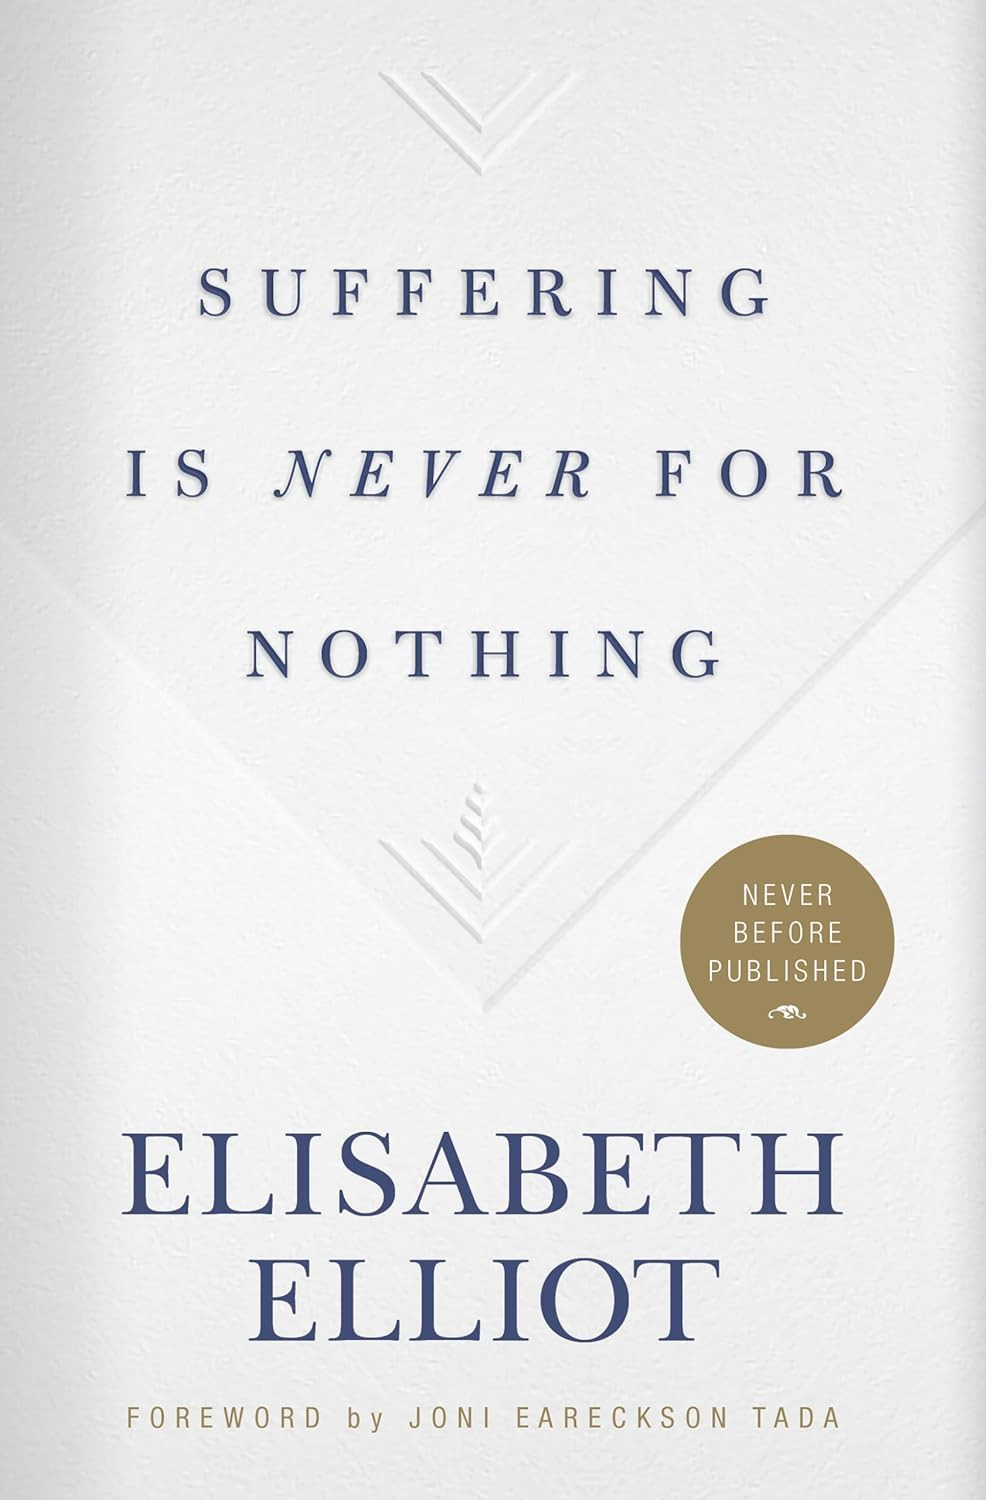 Image of the cover to the book Suffering Is Never For Nothing by Elisabeth Elliot.